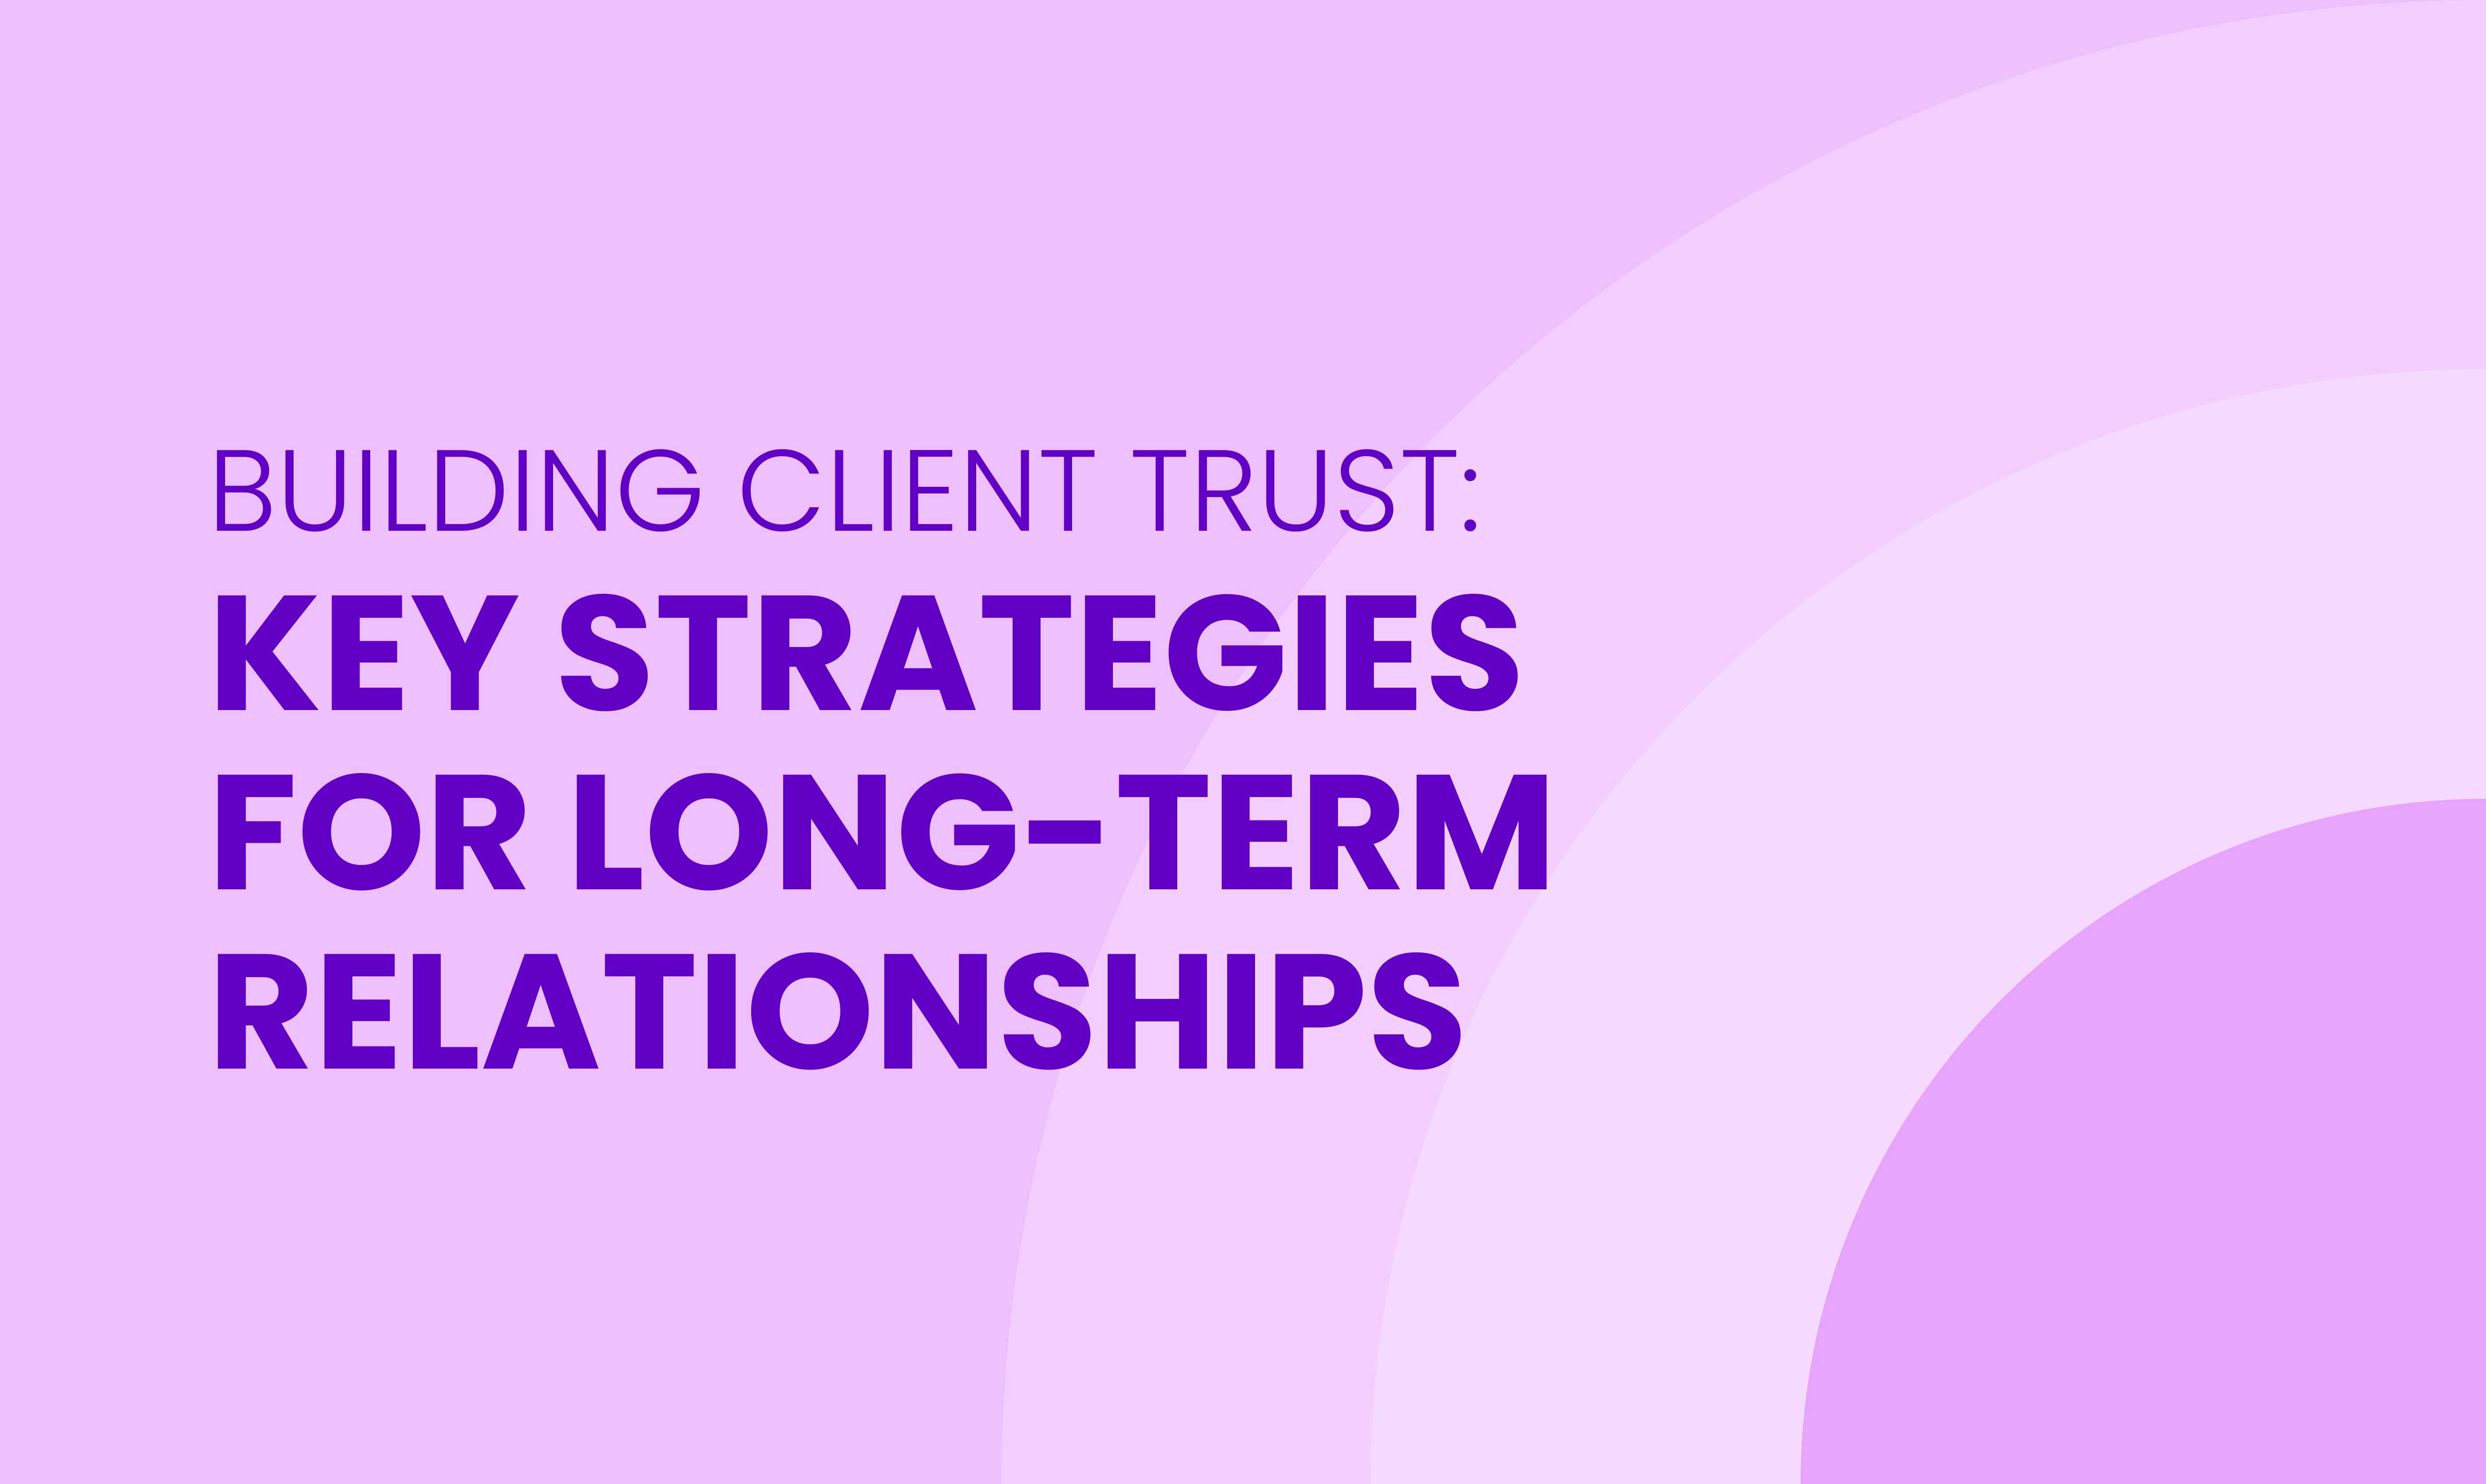 BUILDING CLIENT TRUST: KEY STRATEGIES FOR LONG-TERM RELATIONSHIPS